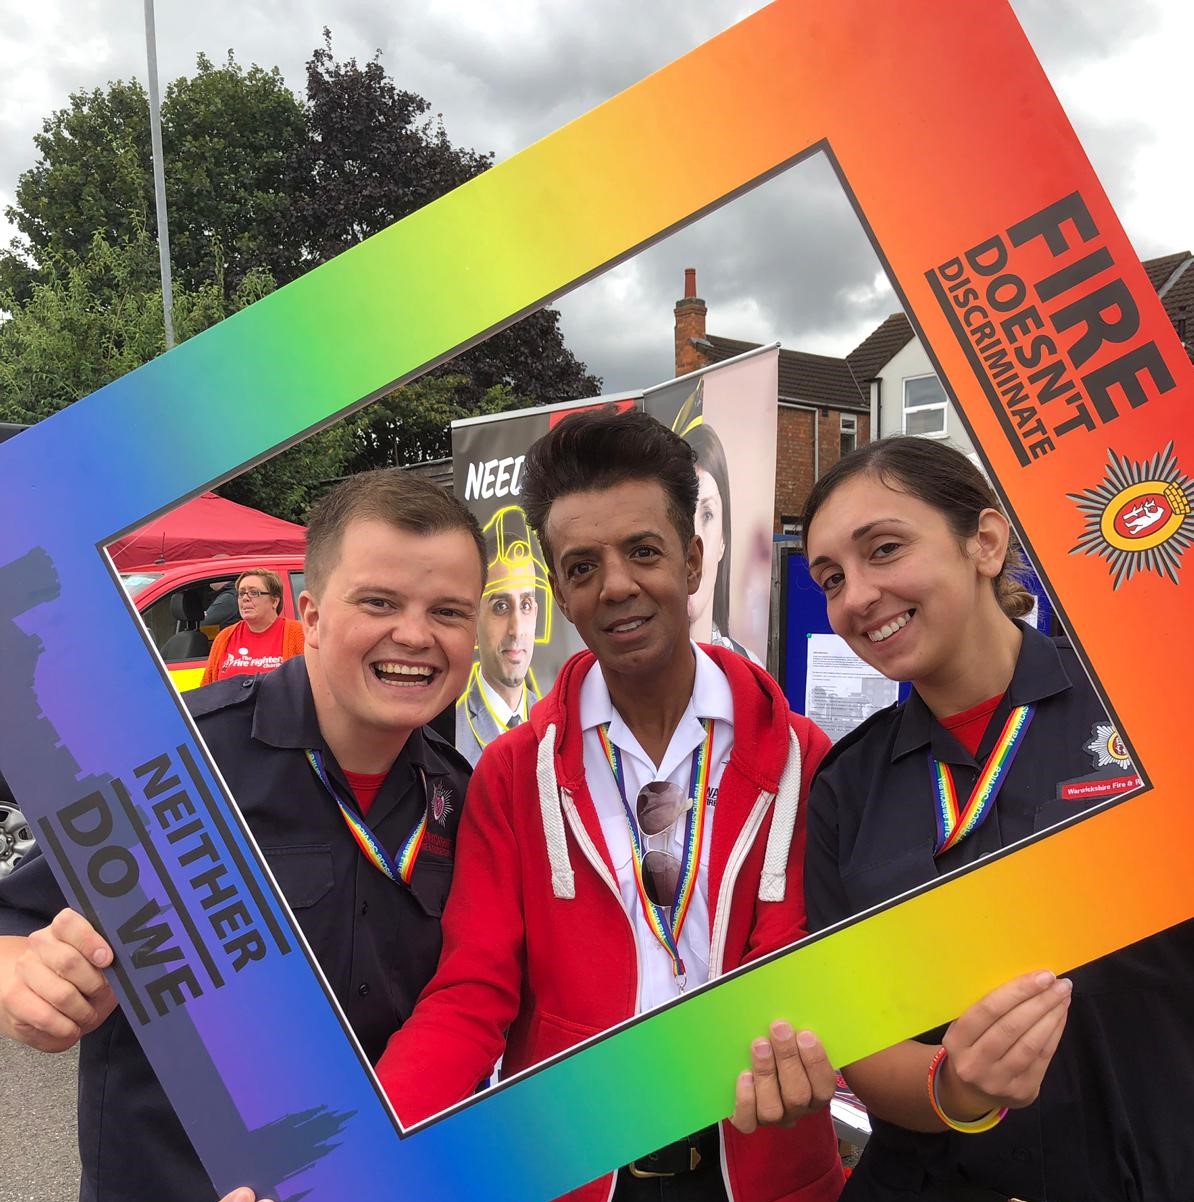 A picture of Imran Dean with colleagues at Warwickshire Pride 2019